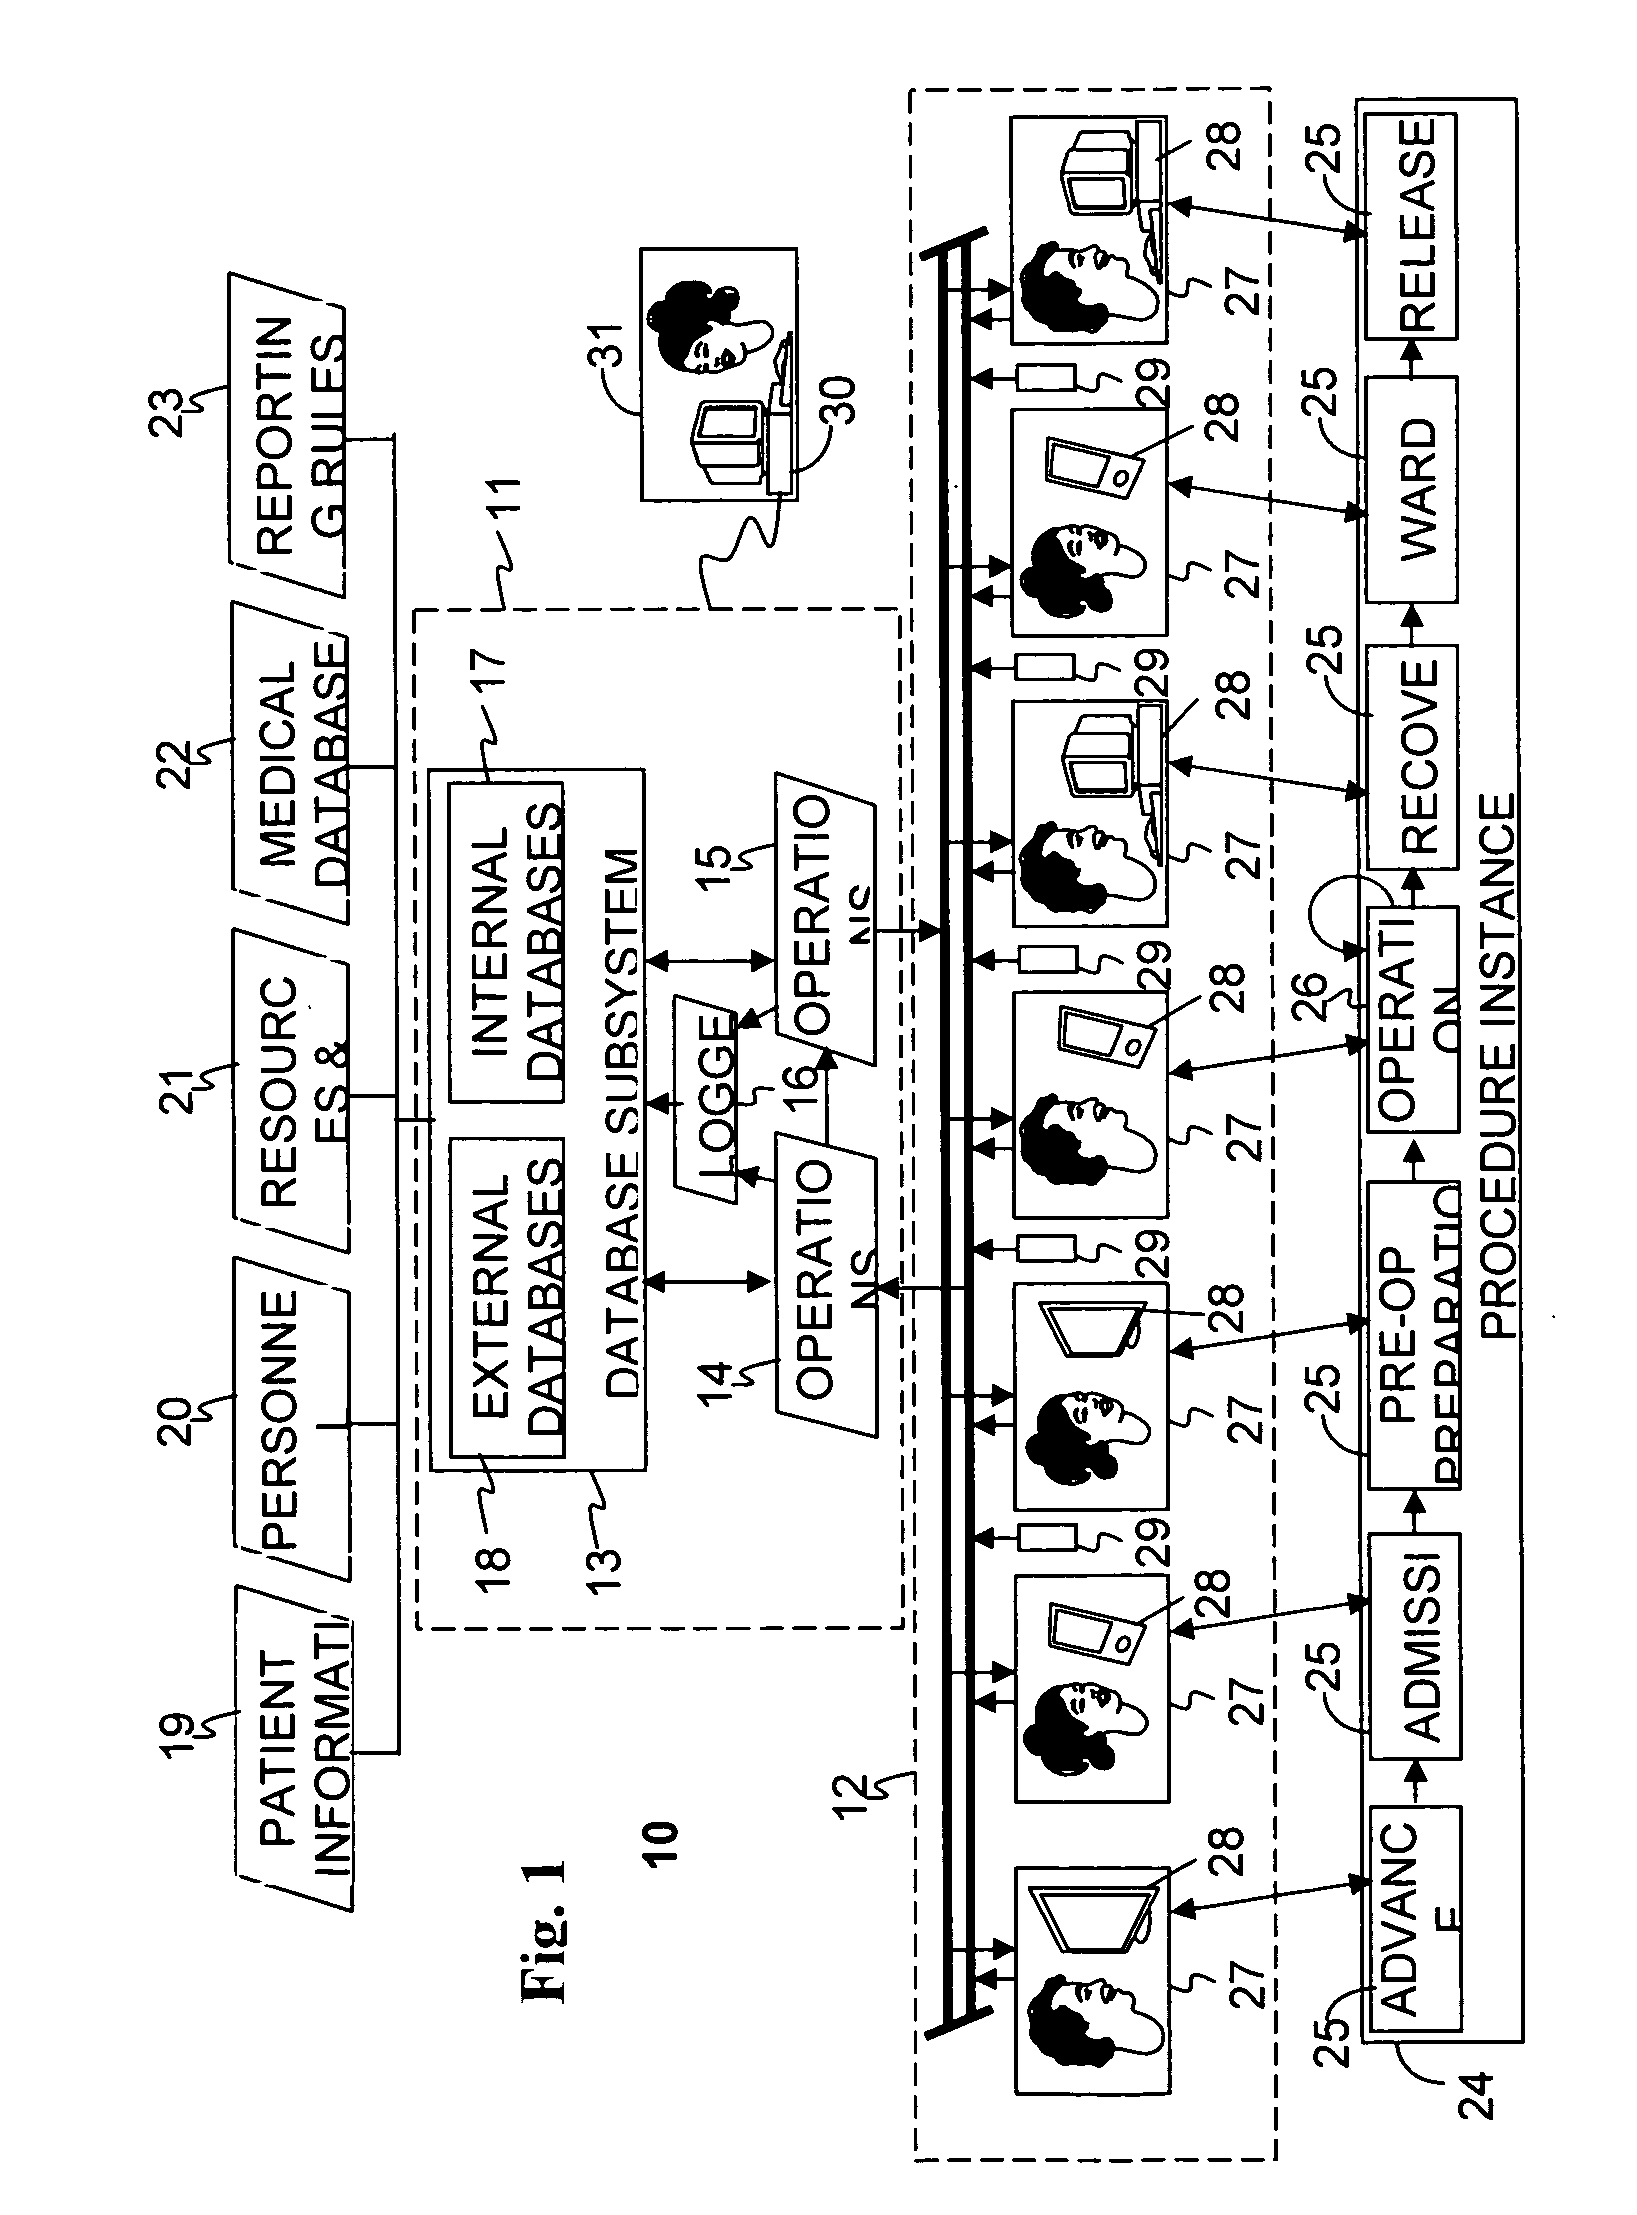 Medical decision support system and method